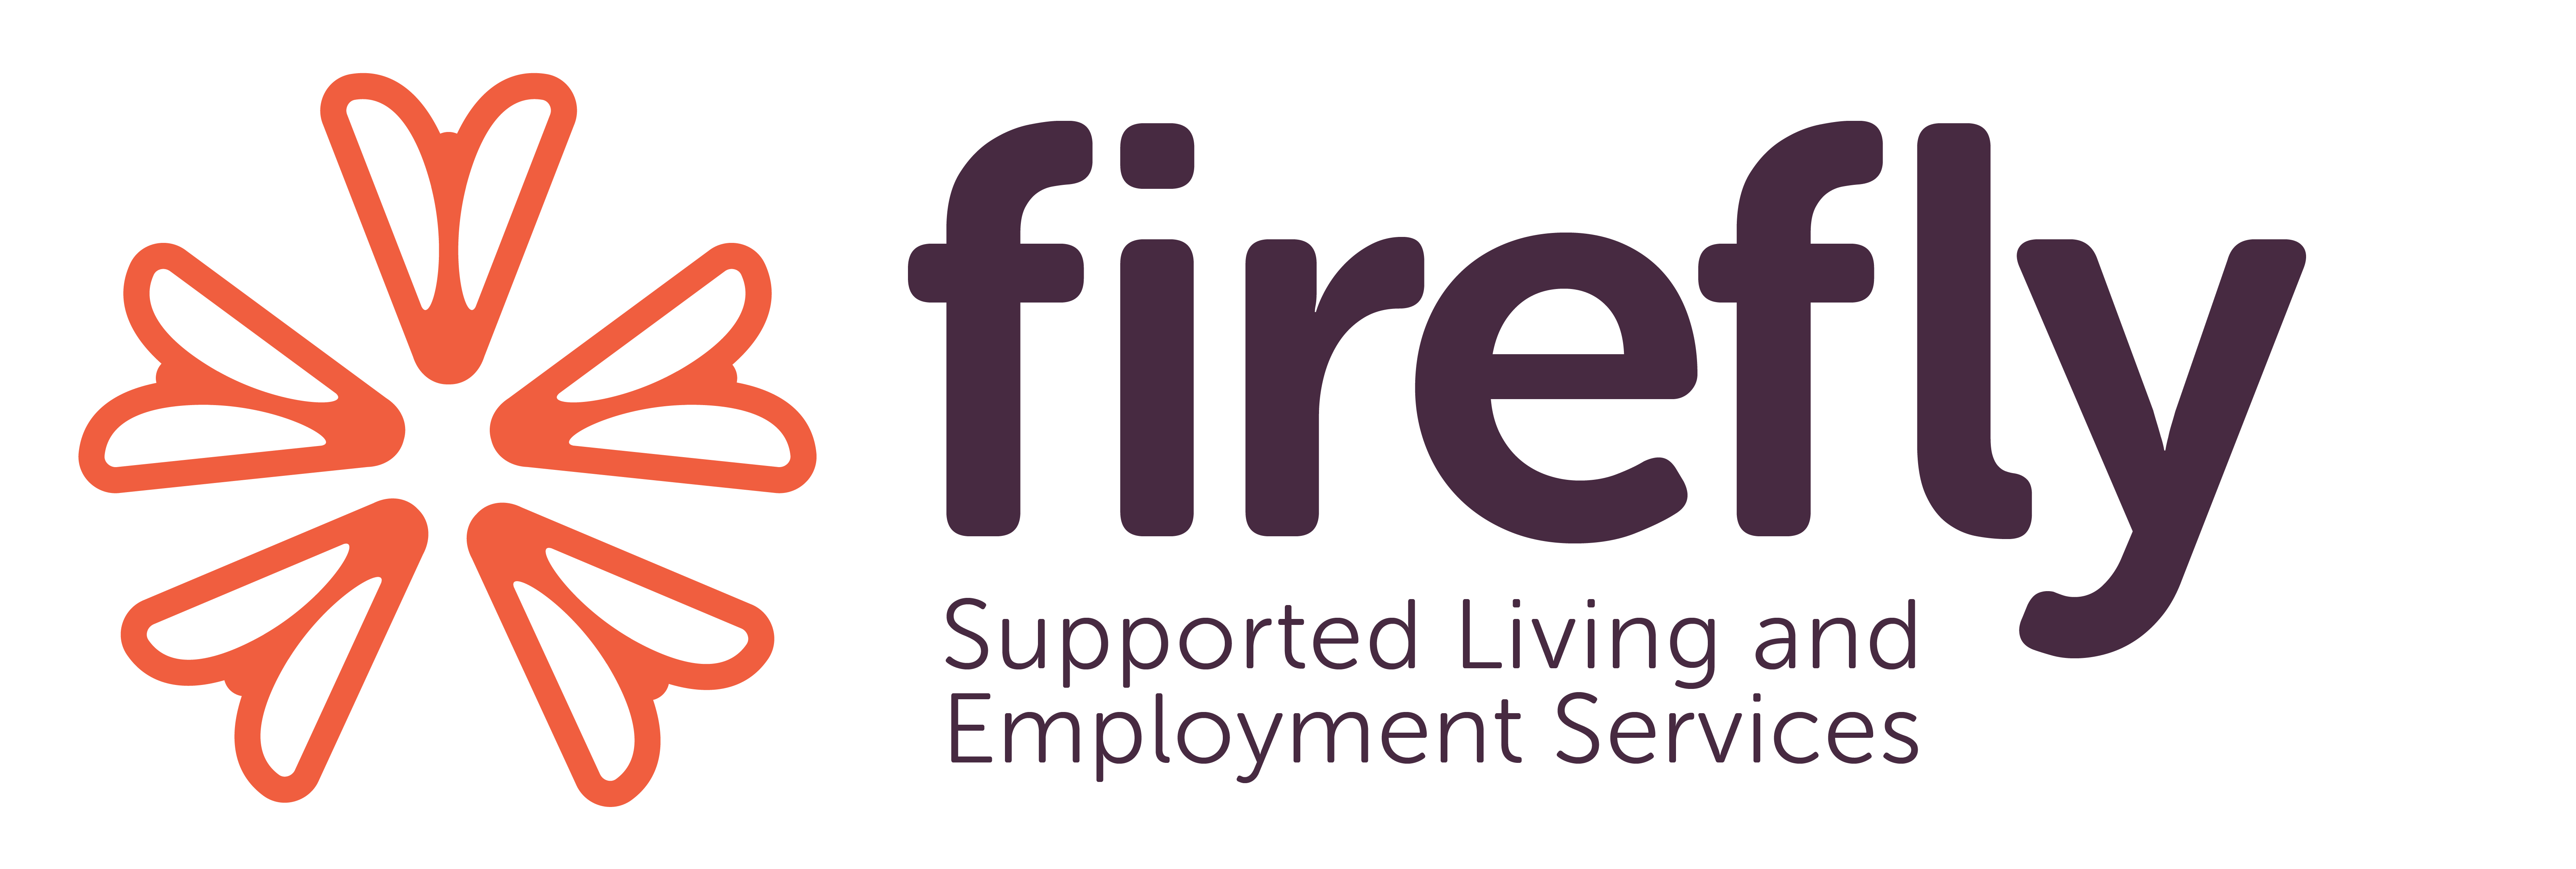 firefly, Supported Living and Employment Services. "firefly" with large, bold, and purple text. "Supported Living and Employment Services" in smaller and purple text.